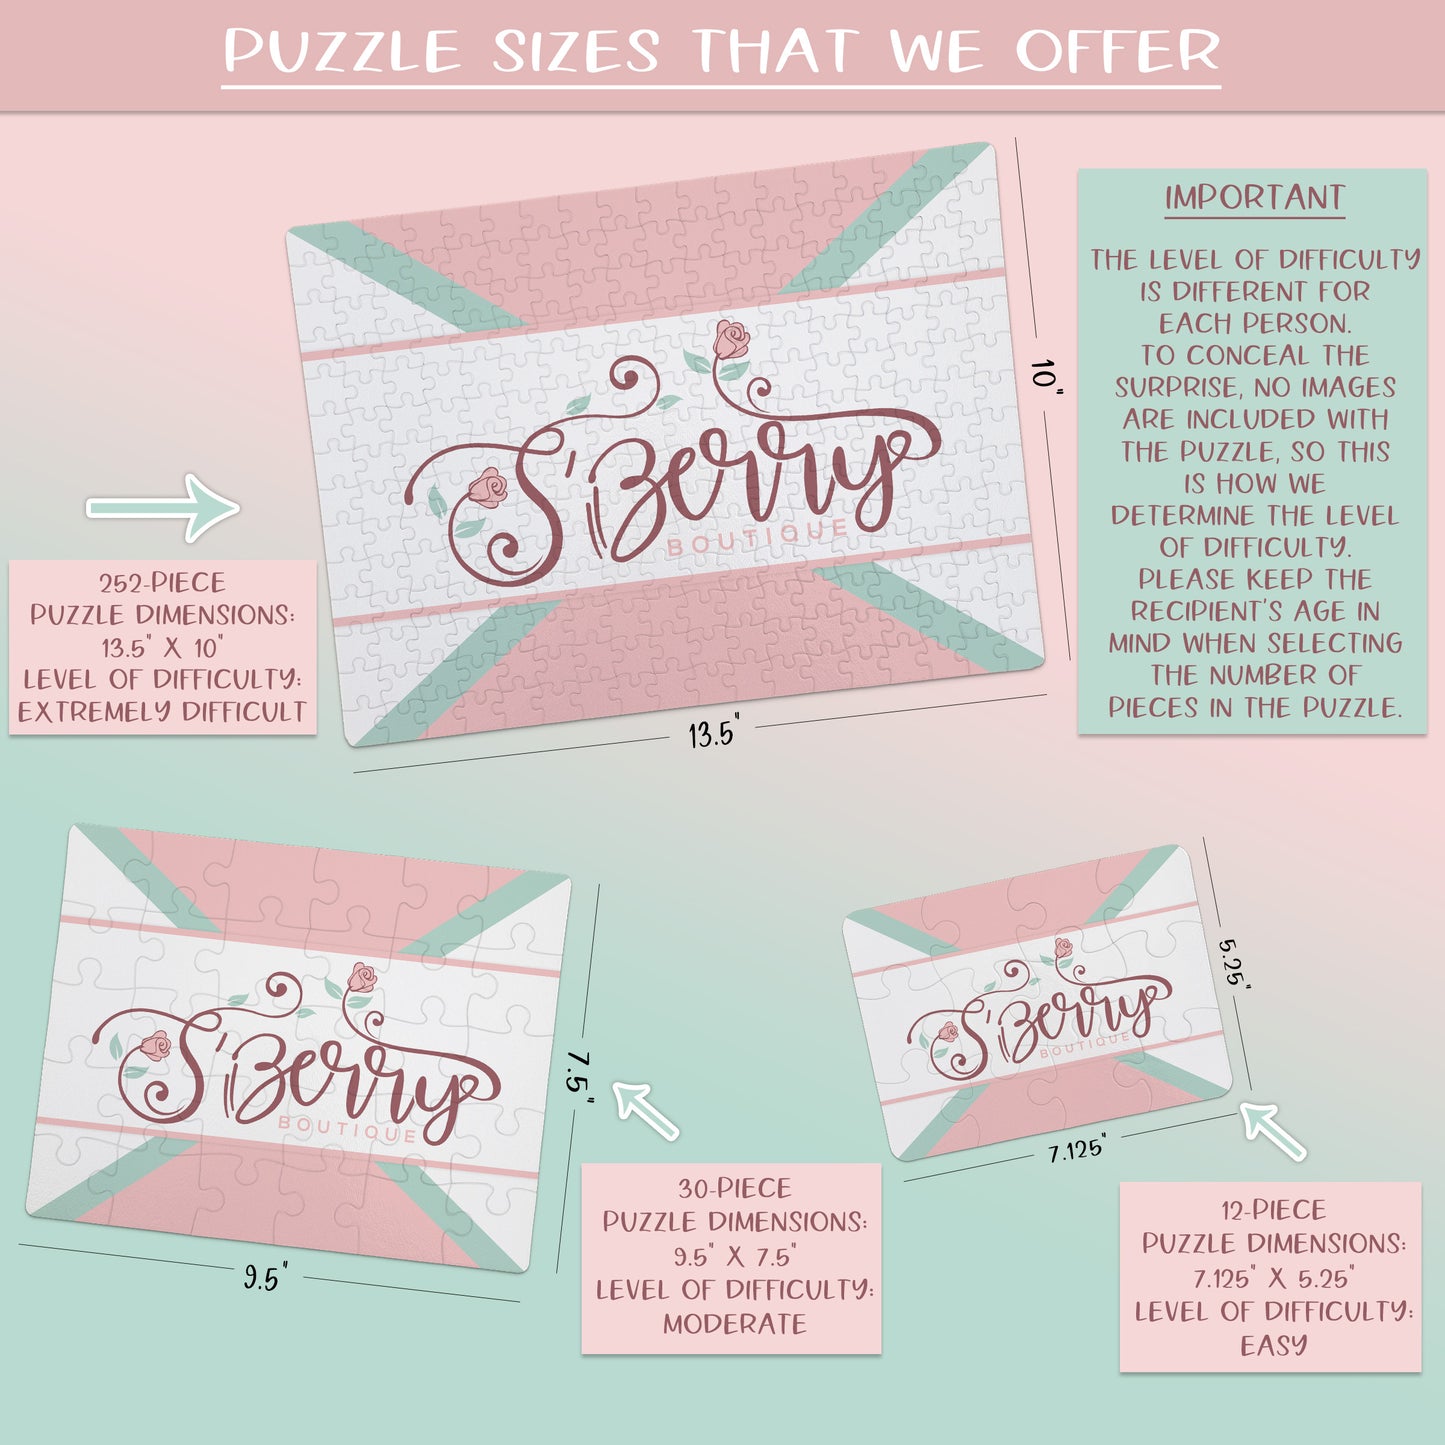 Create Your Own Puzzle - Arrow Design - CYOP0222 | S'Berry Boutique